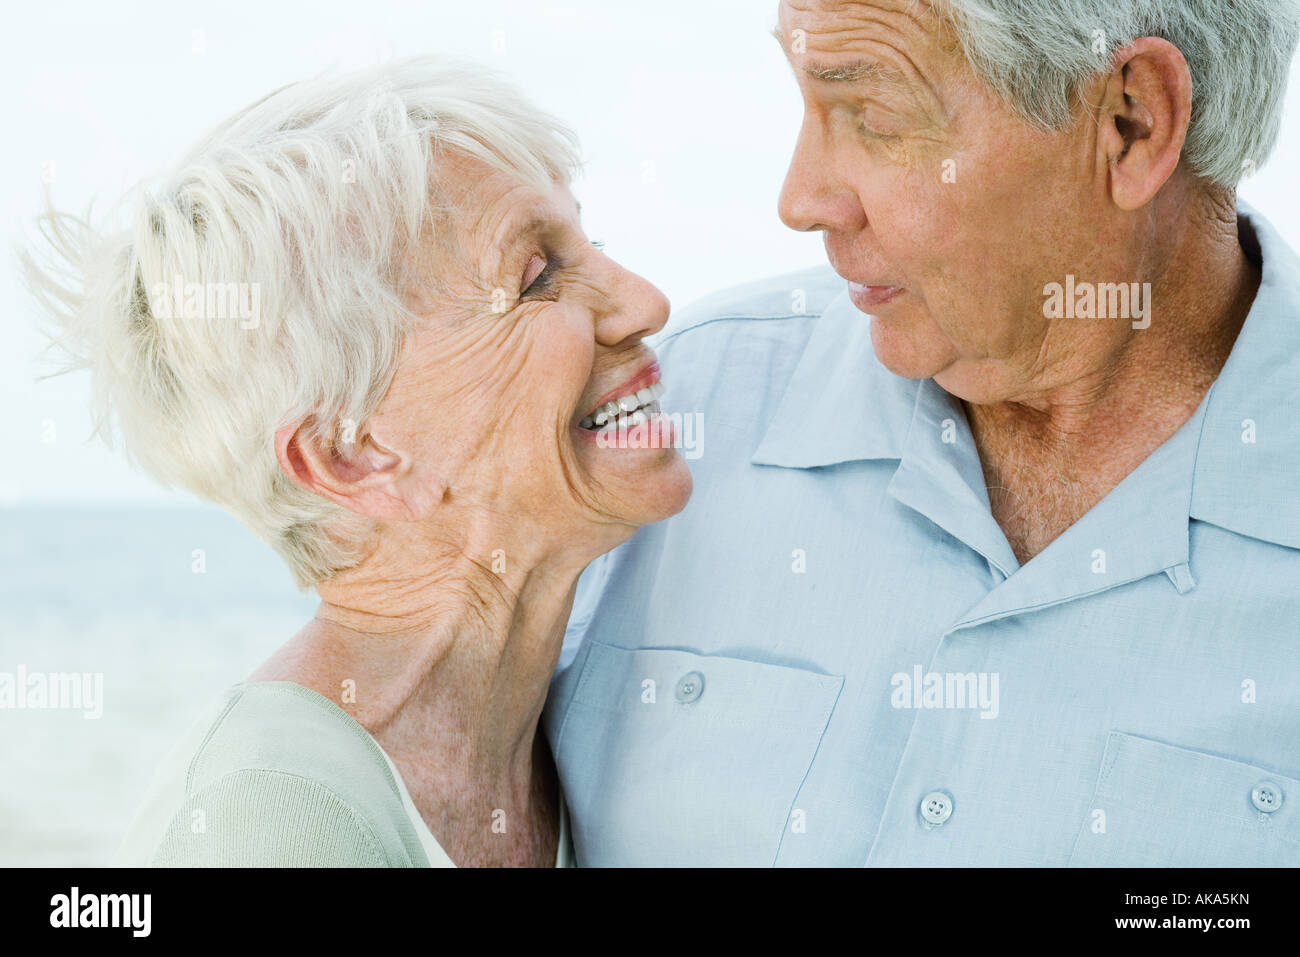 Senior couple looking at each other, woman smiling, man raising eyebrows Stock Photo